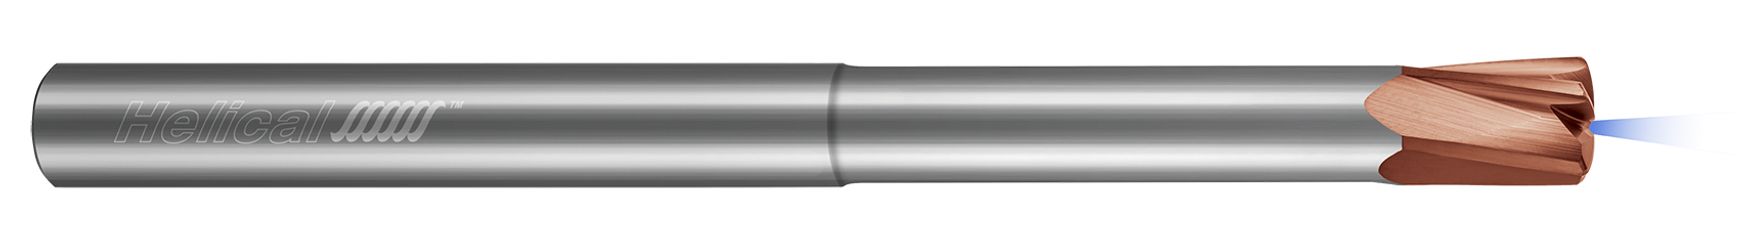 High Feed End Mills - Steels up to 45 Rc - Variable Pitch - Coolant Through - Reduced Neck